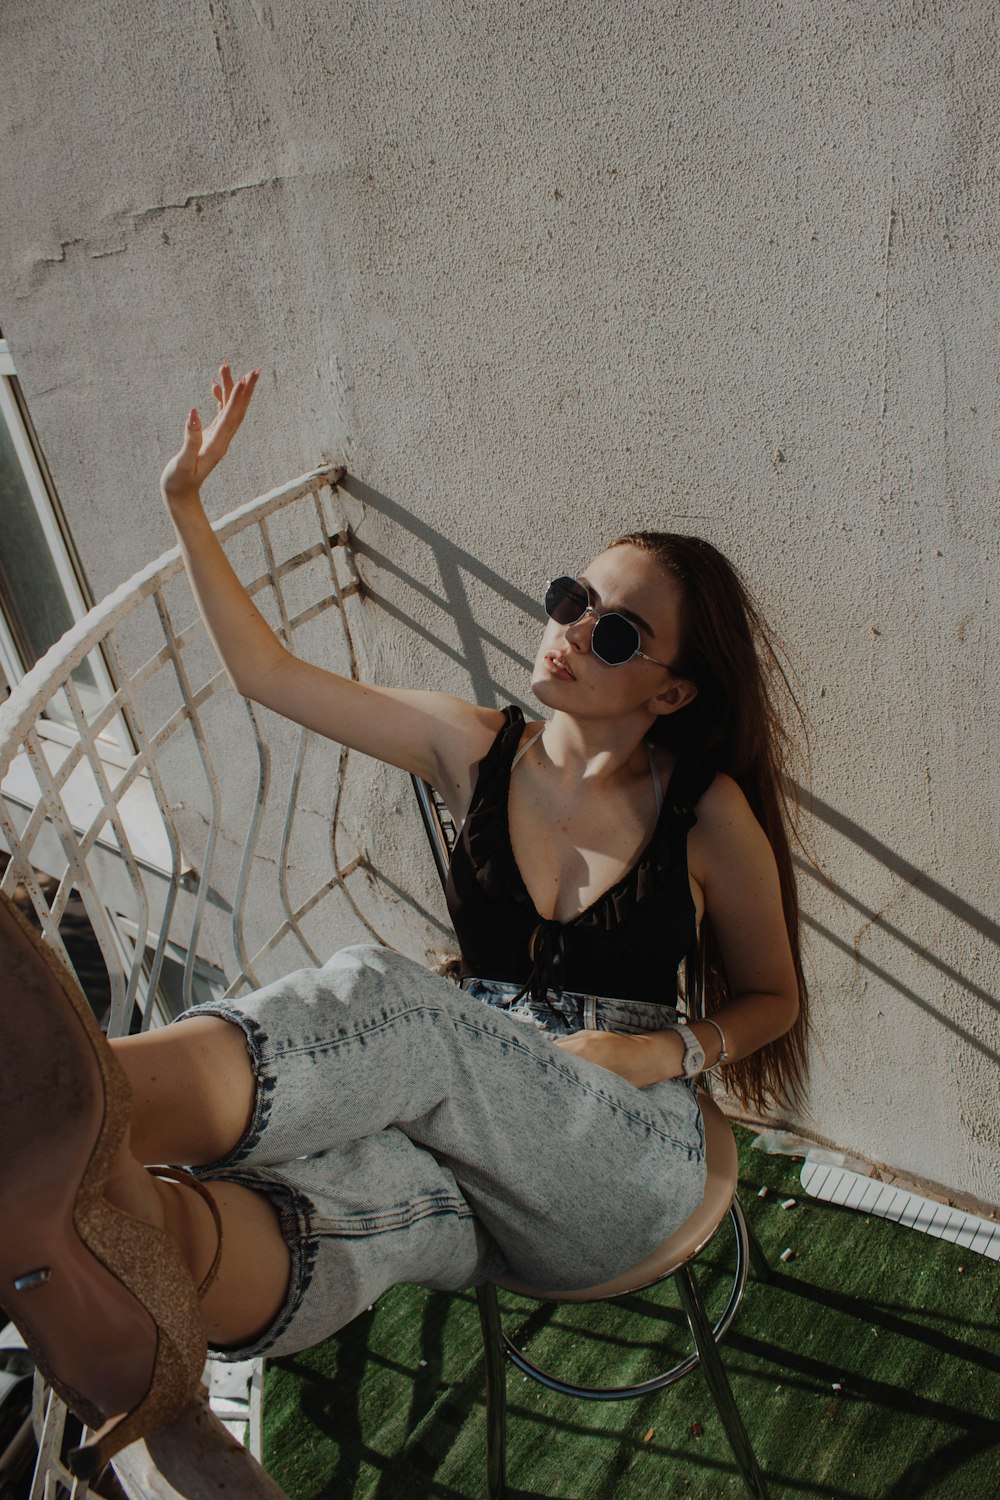 woman in black tank top and blue denim jeans wearing black sunglasses sitting on white metal